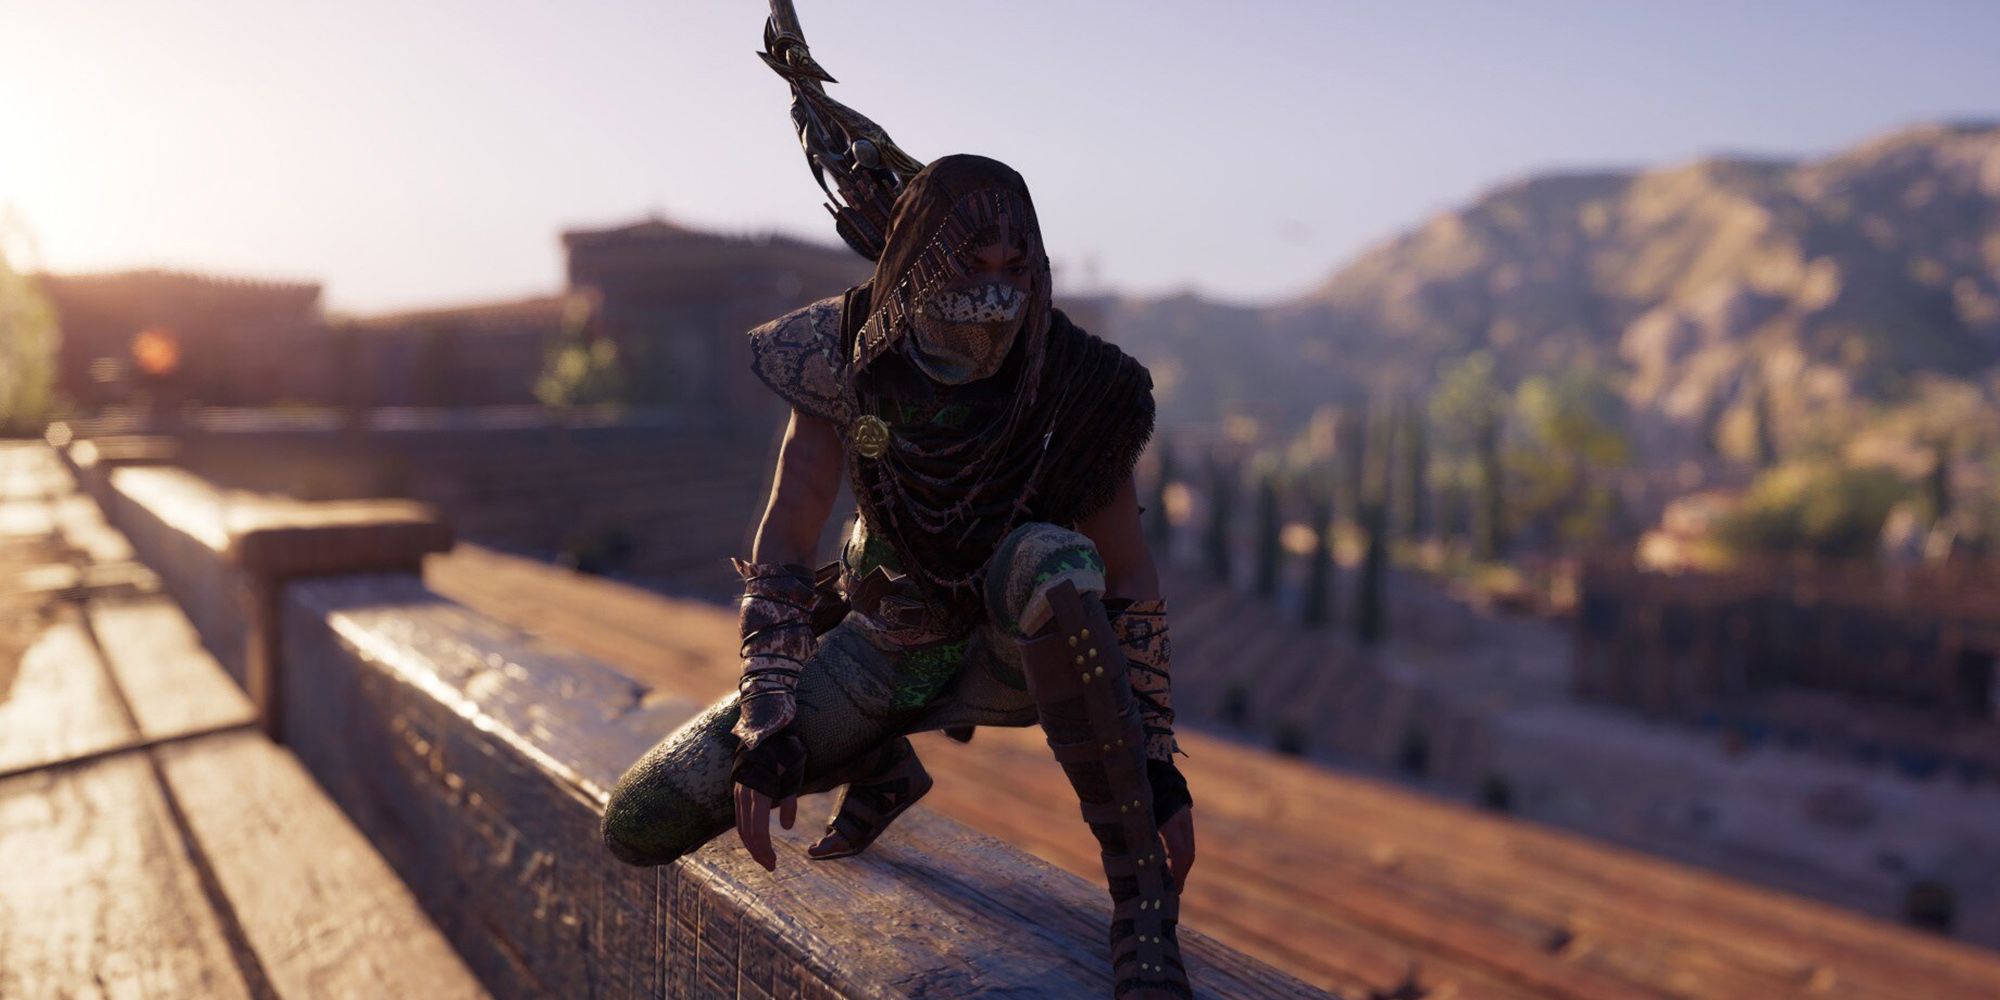 Assassin's Creed Odyssey - Kassandra On A Rooftop In The Snake Set